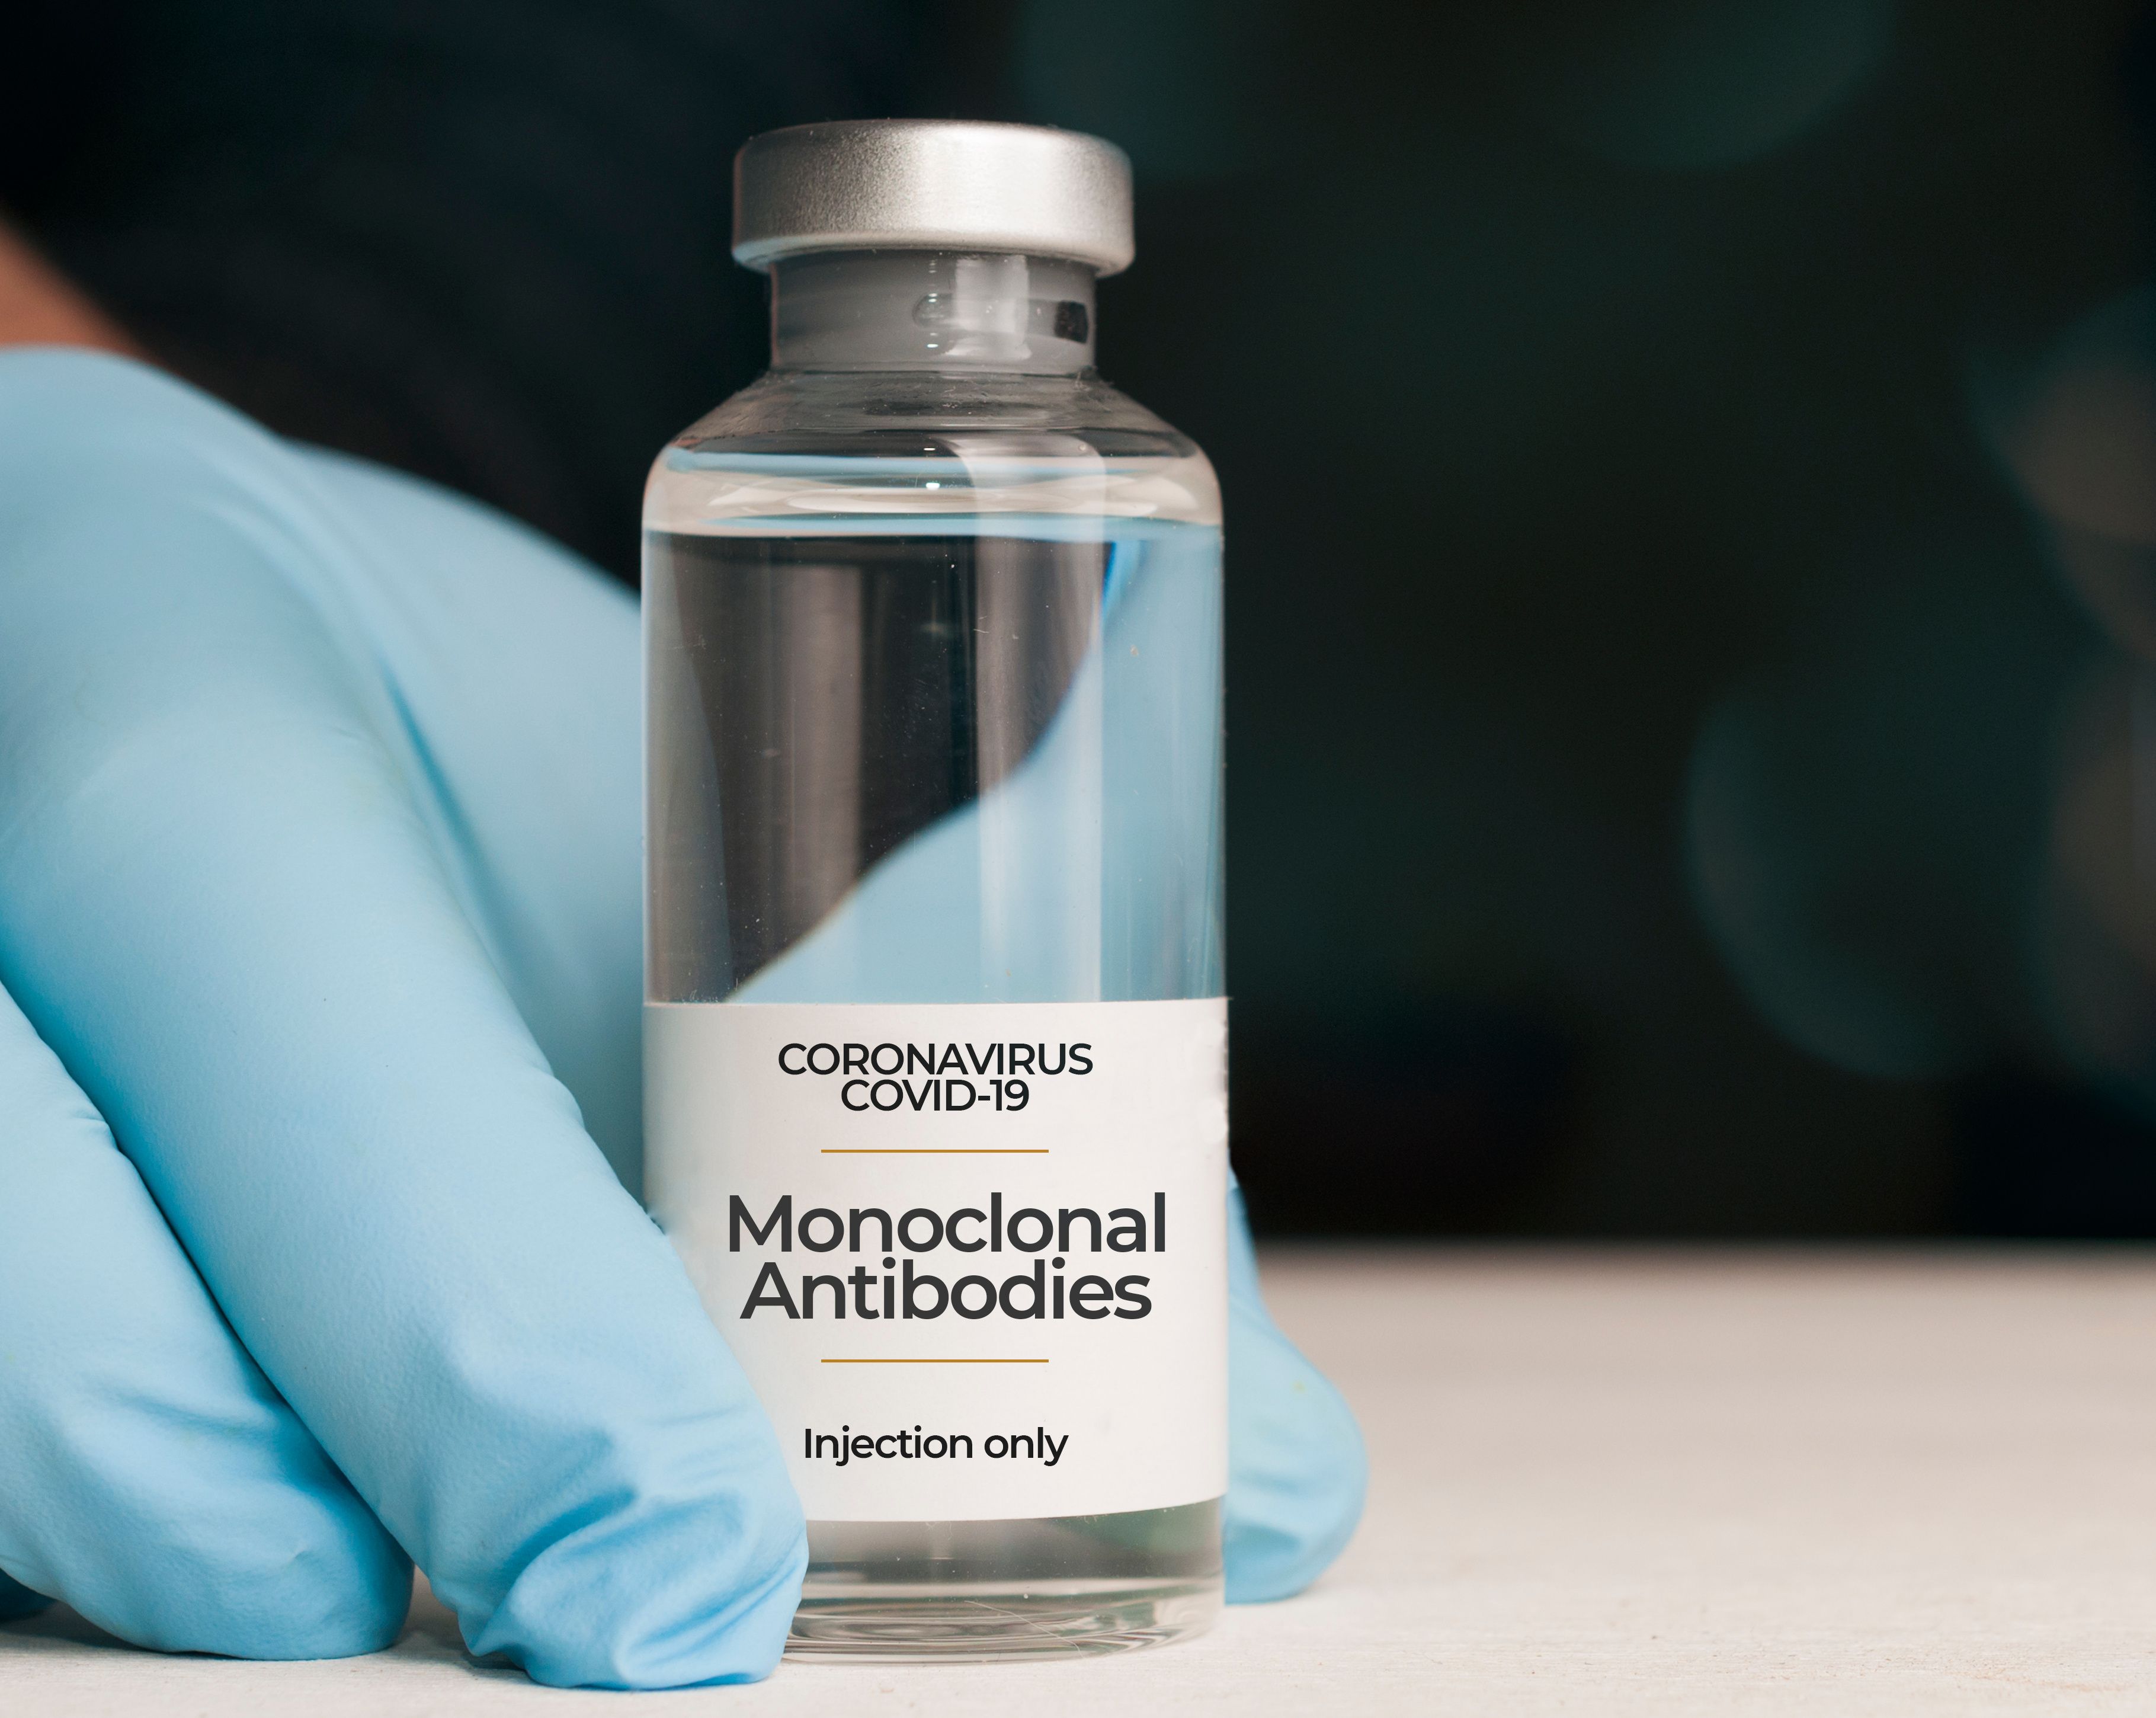 Of 102 monoclonal antibodies tested, only 2 effectively neutralized all variants of concern, including Omicron BA.1 and BA.2. These treatments could be utilized for immunocompromised people requiring protection beyond COVID-19 vaccination.